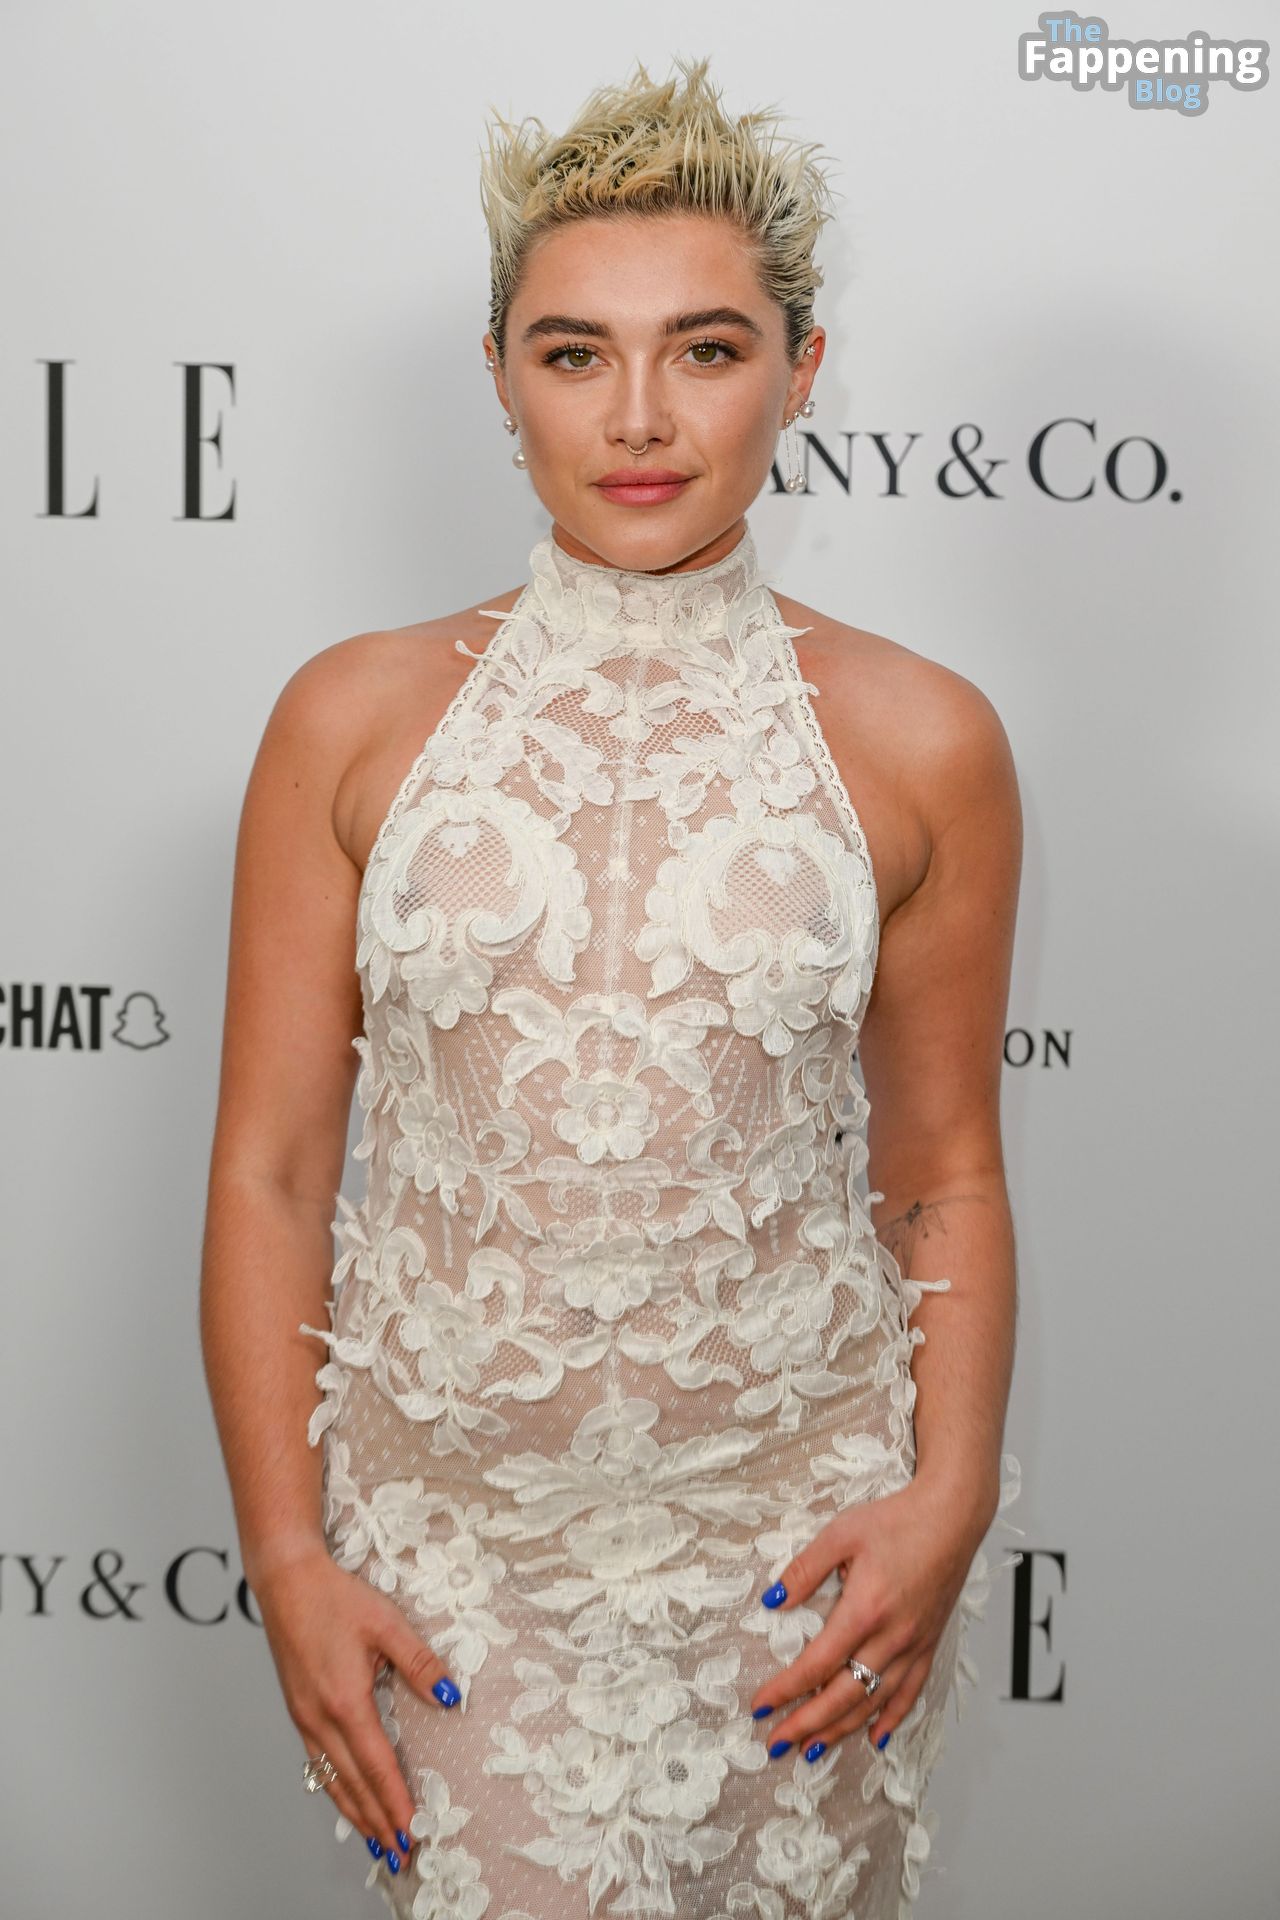 Florence-Pugh-Nude-Tits-47-The-Fappening-Blog.jpg